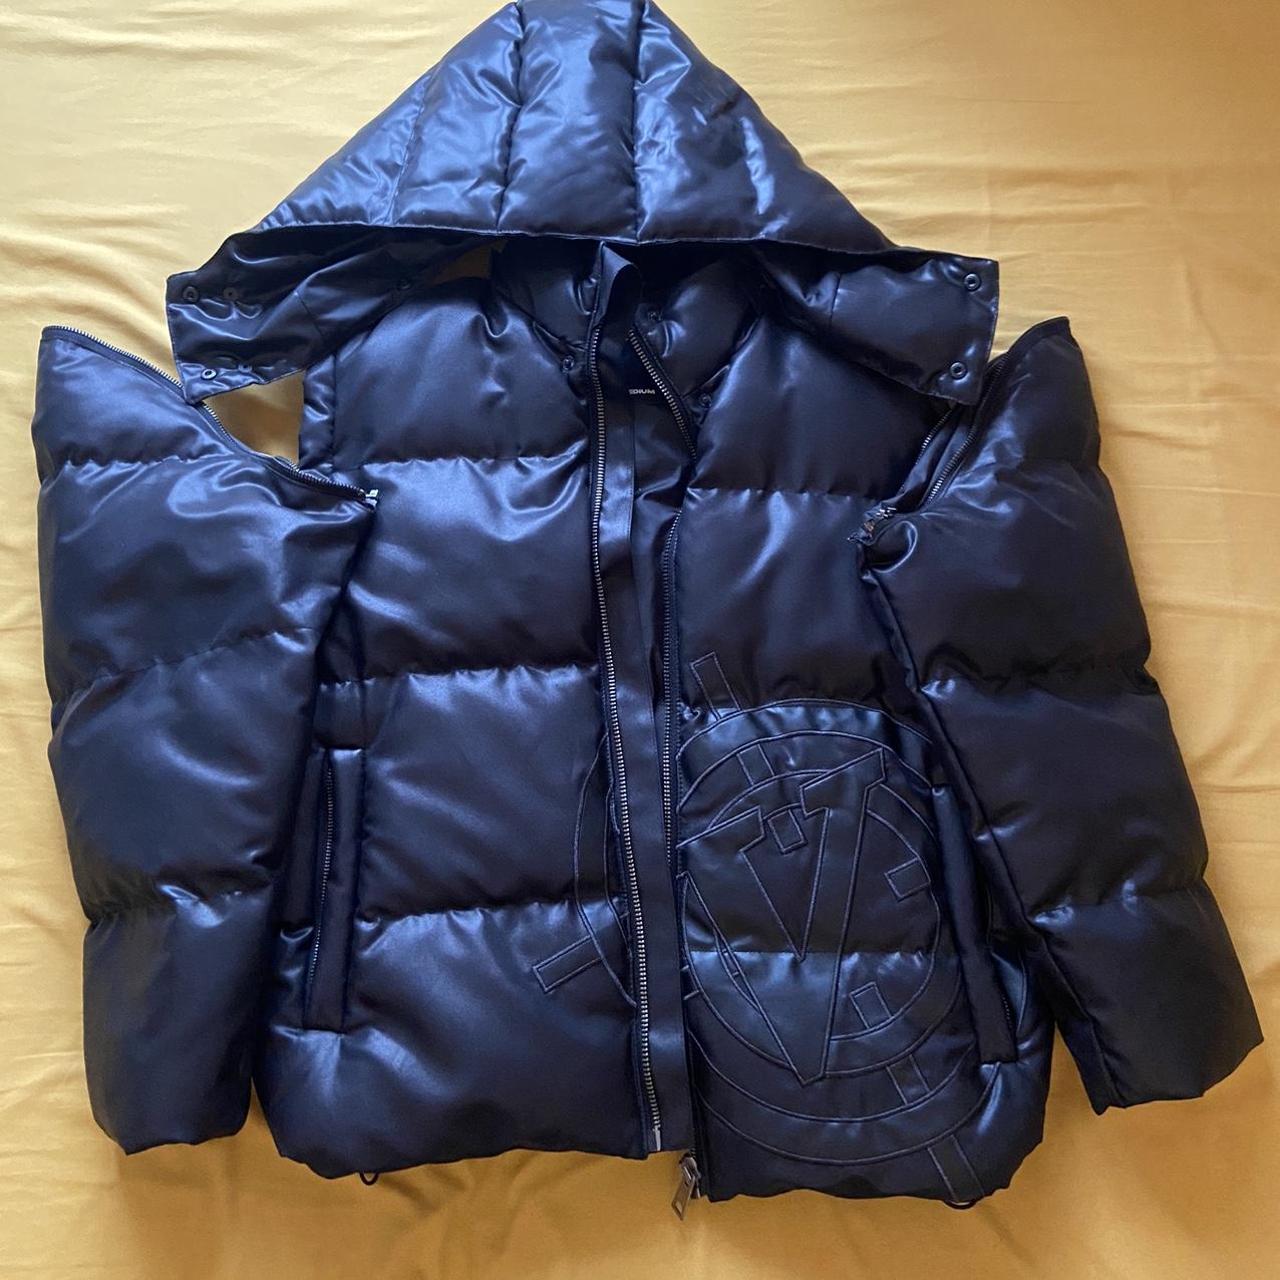 VICINITY PUFFER BLACK SOLD OUT - SIZE M... - Depop